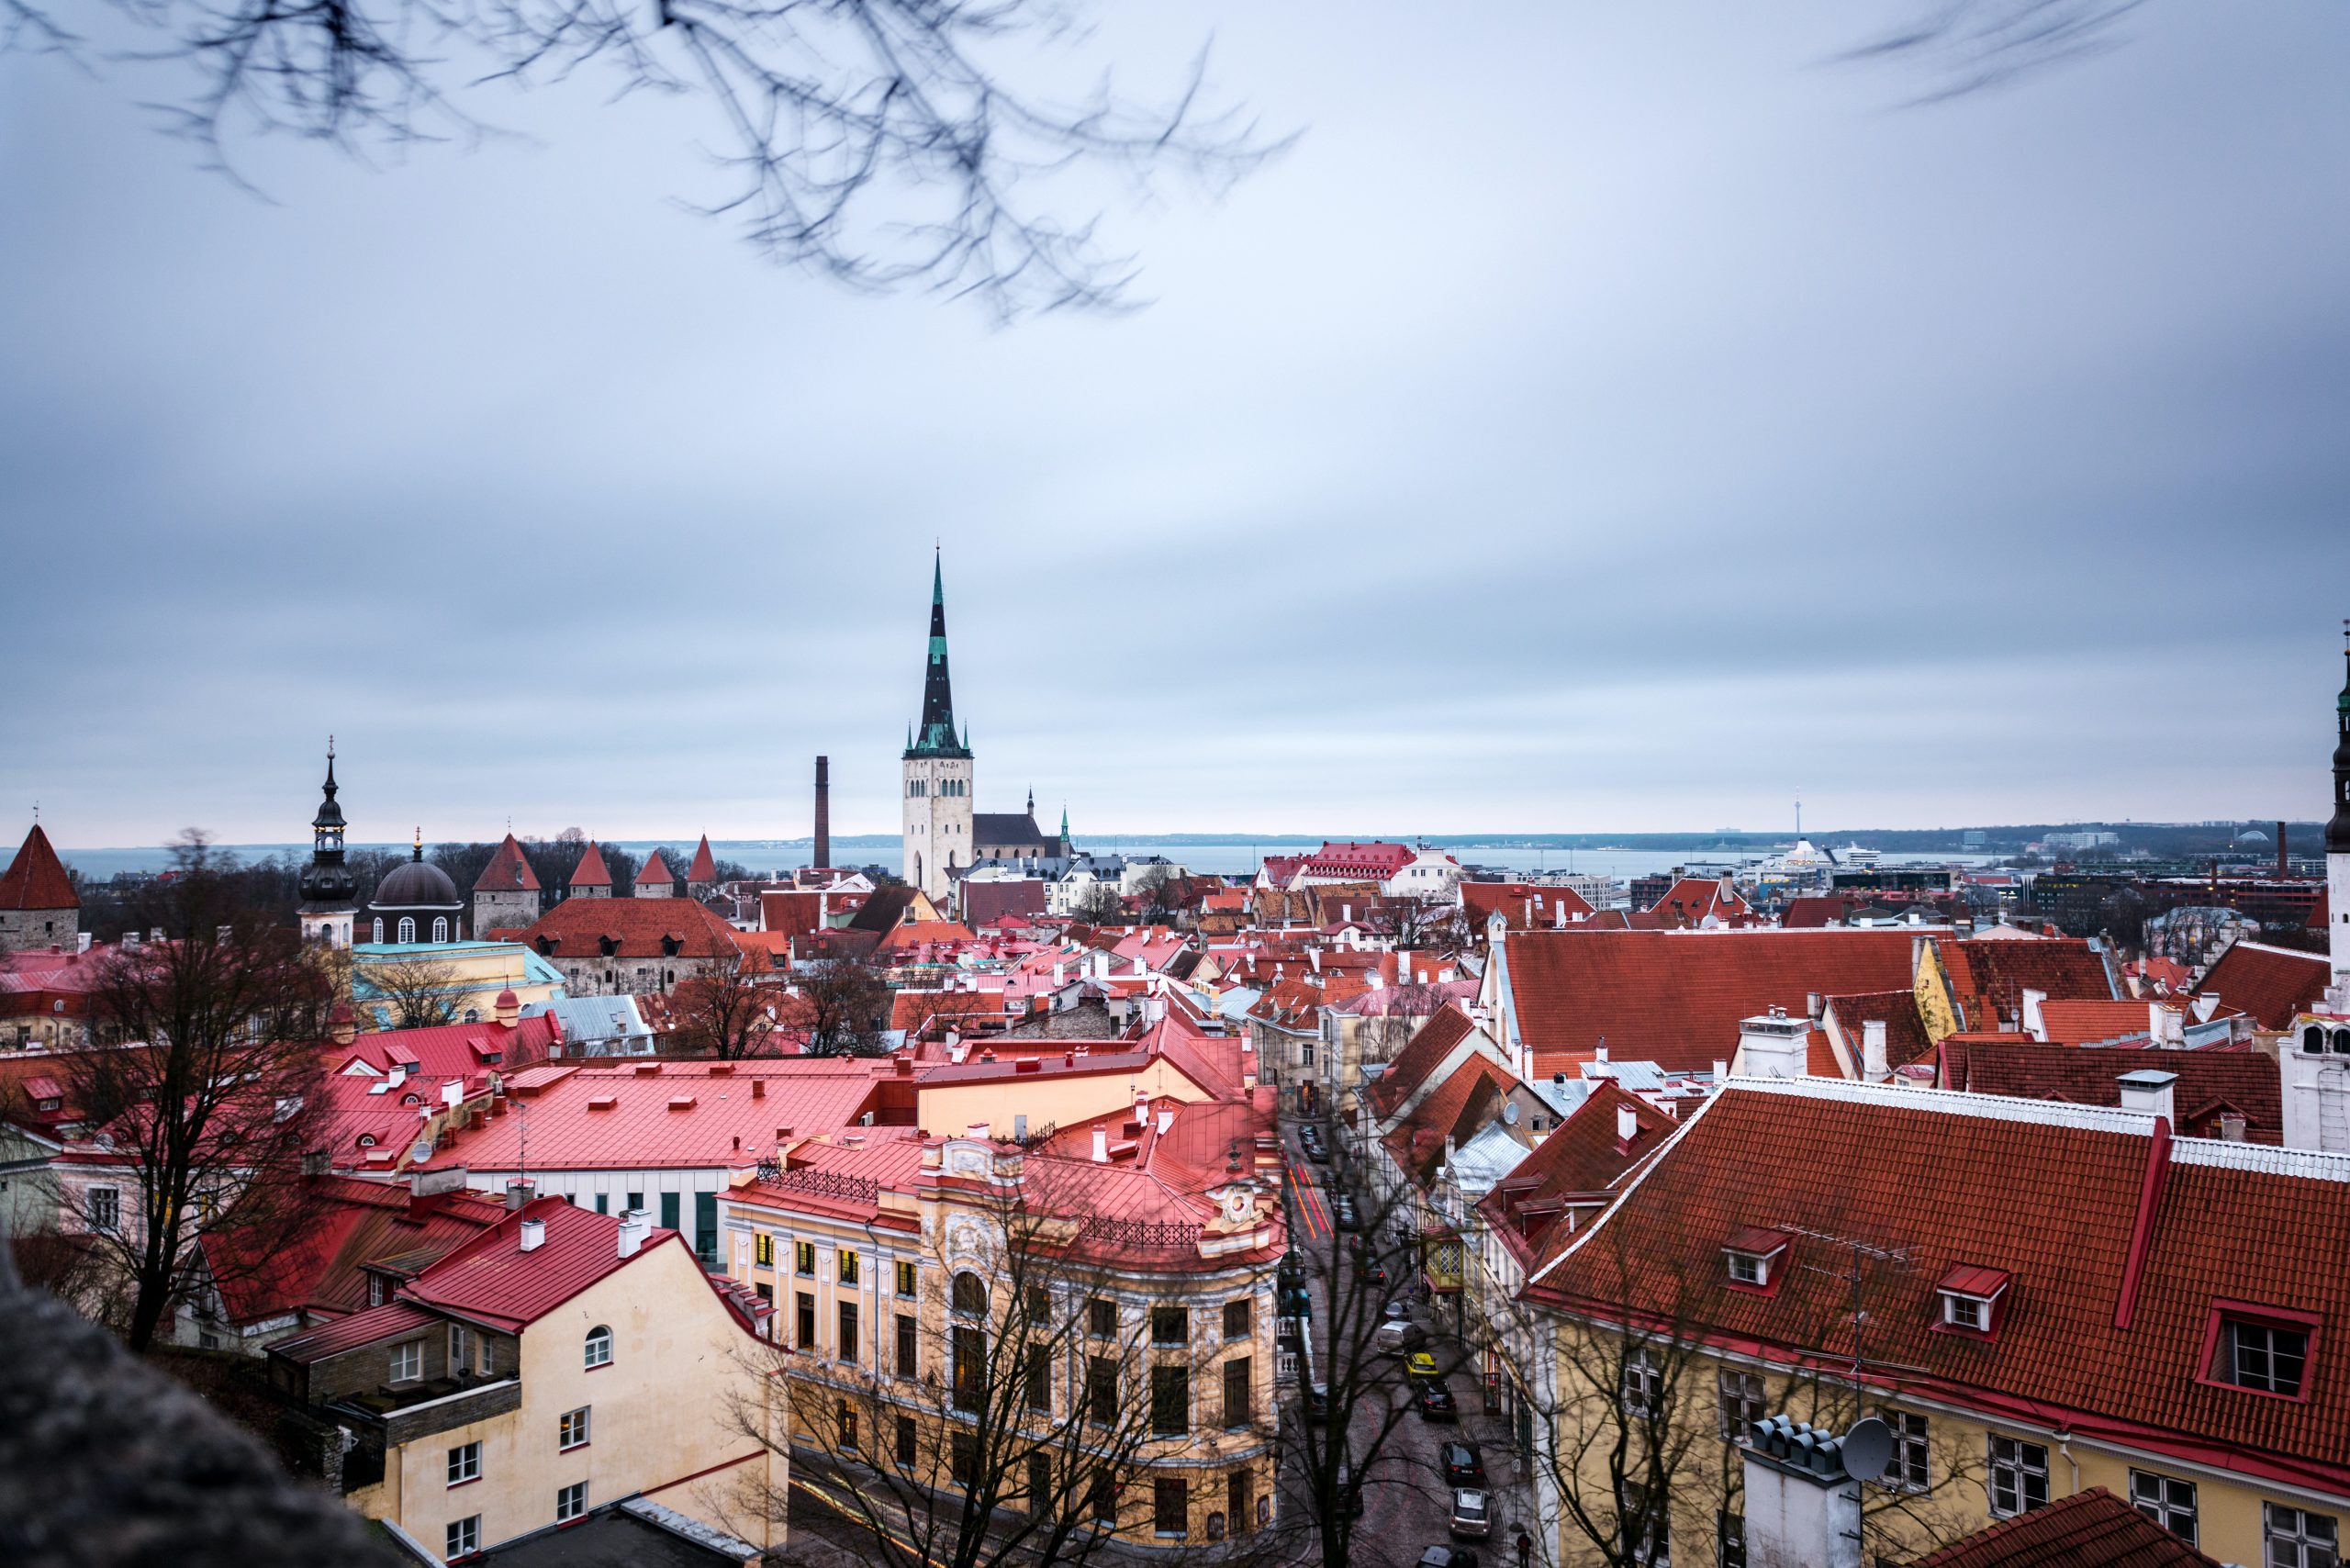 Obtaining license for a fund manager in Estonia